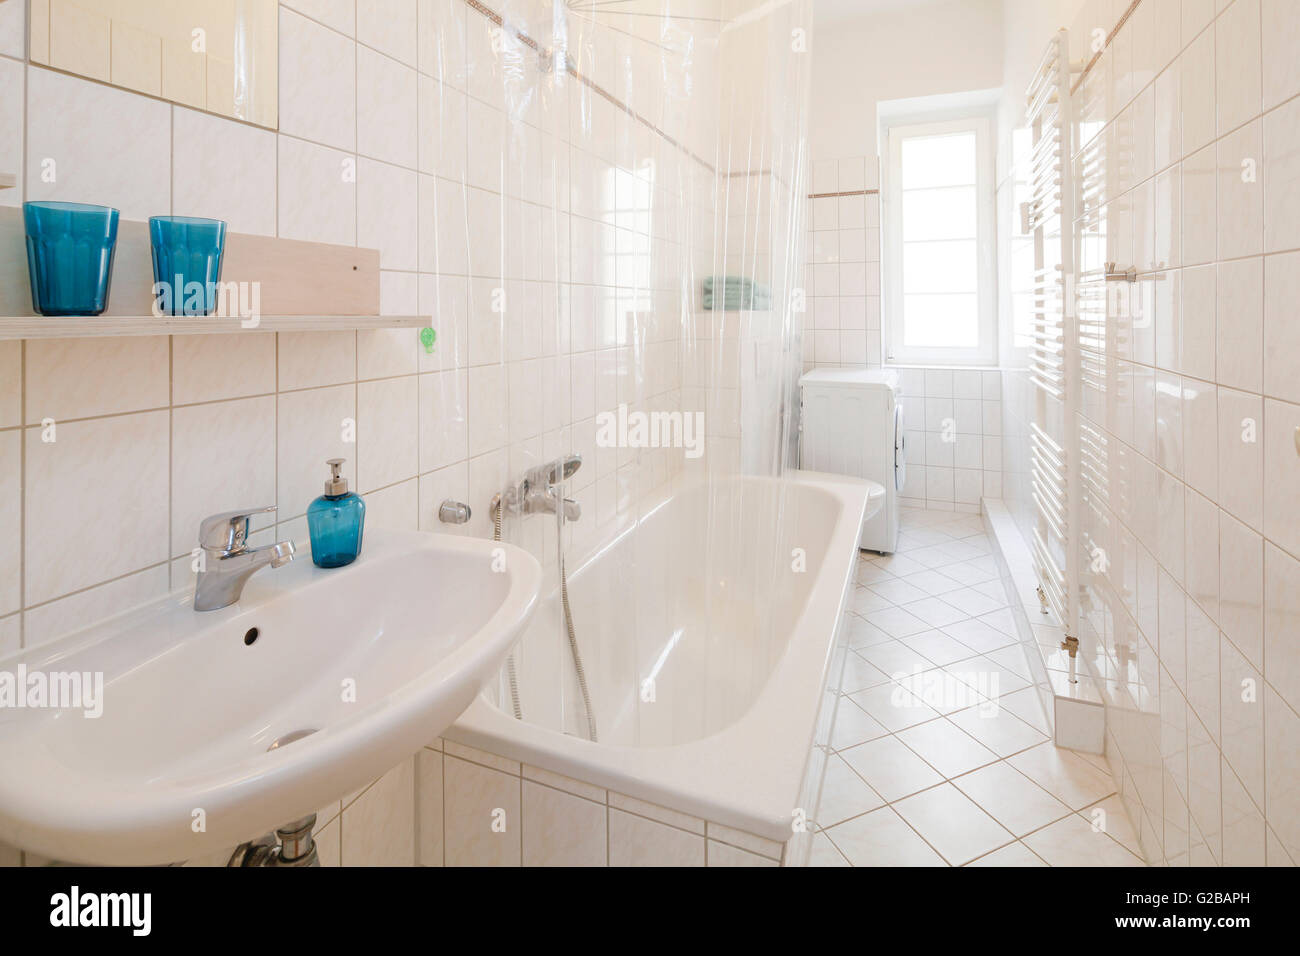 Wisbyer Strasse 59. Modern bathroom with white tiling and white features. Blue accessories. Stock Photo